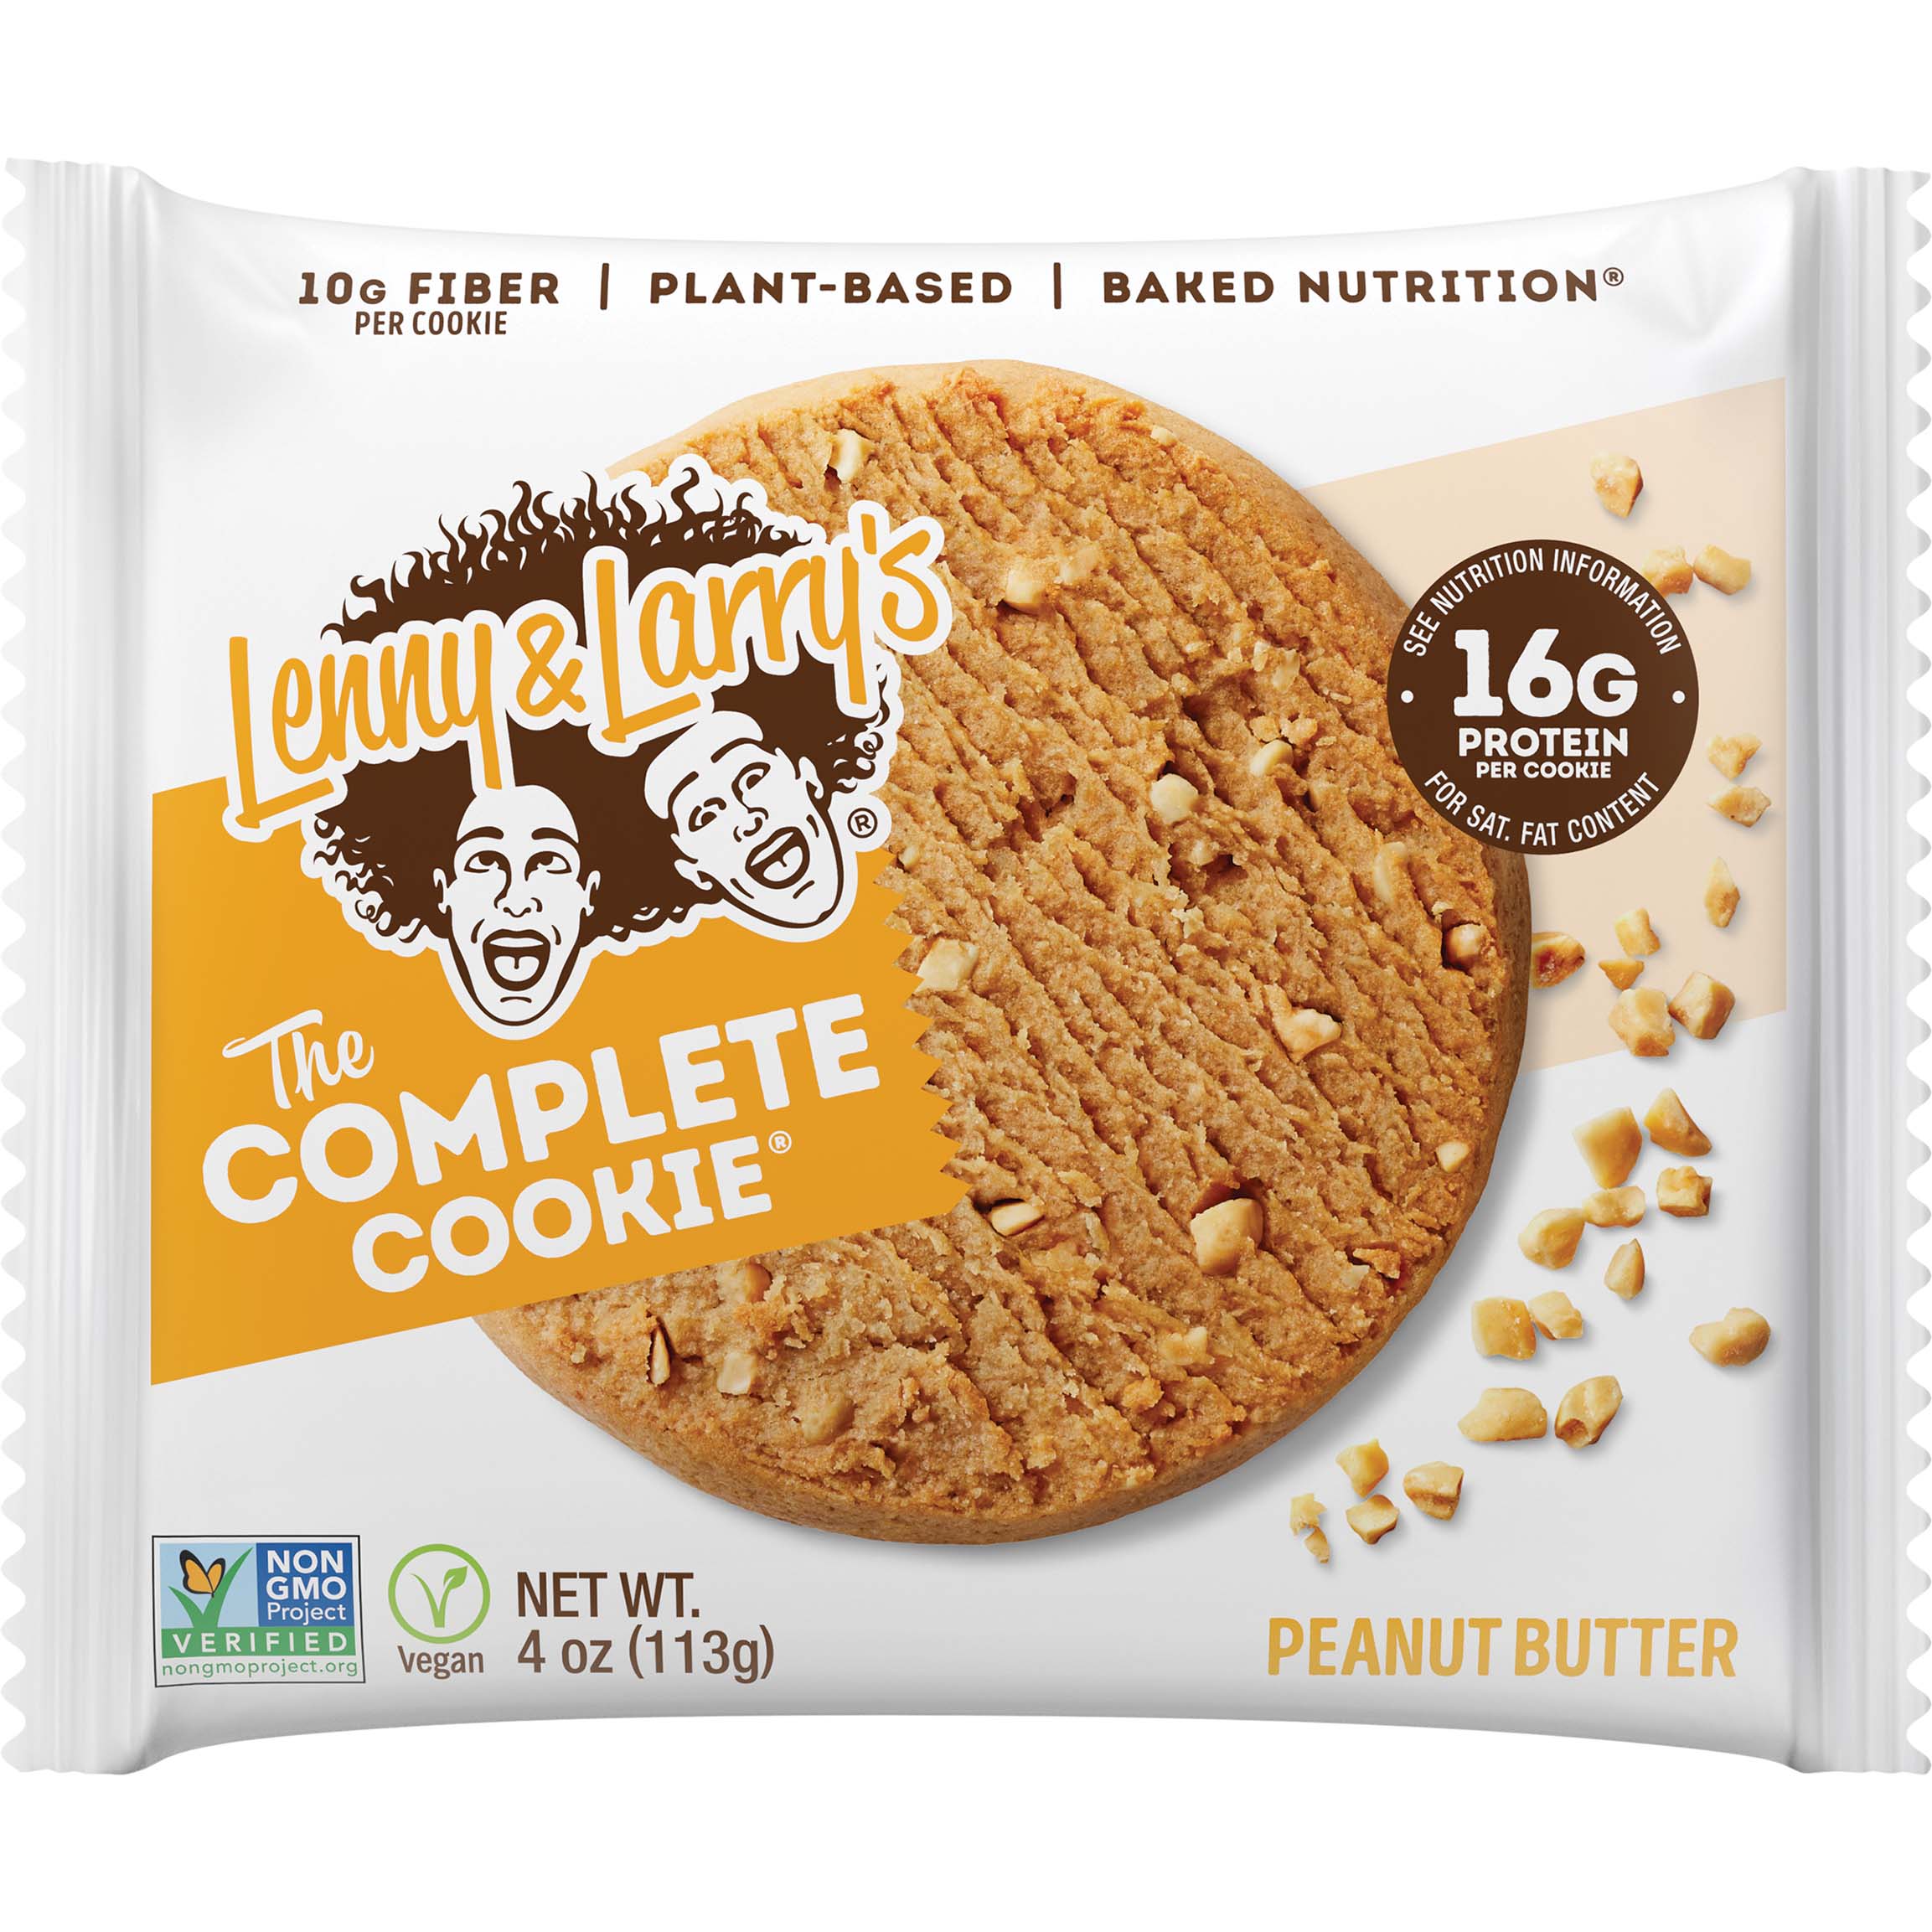 Lenny & Larry’s Complete Cookies, Peanut Butter Chocolate, 1 Piece